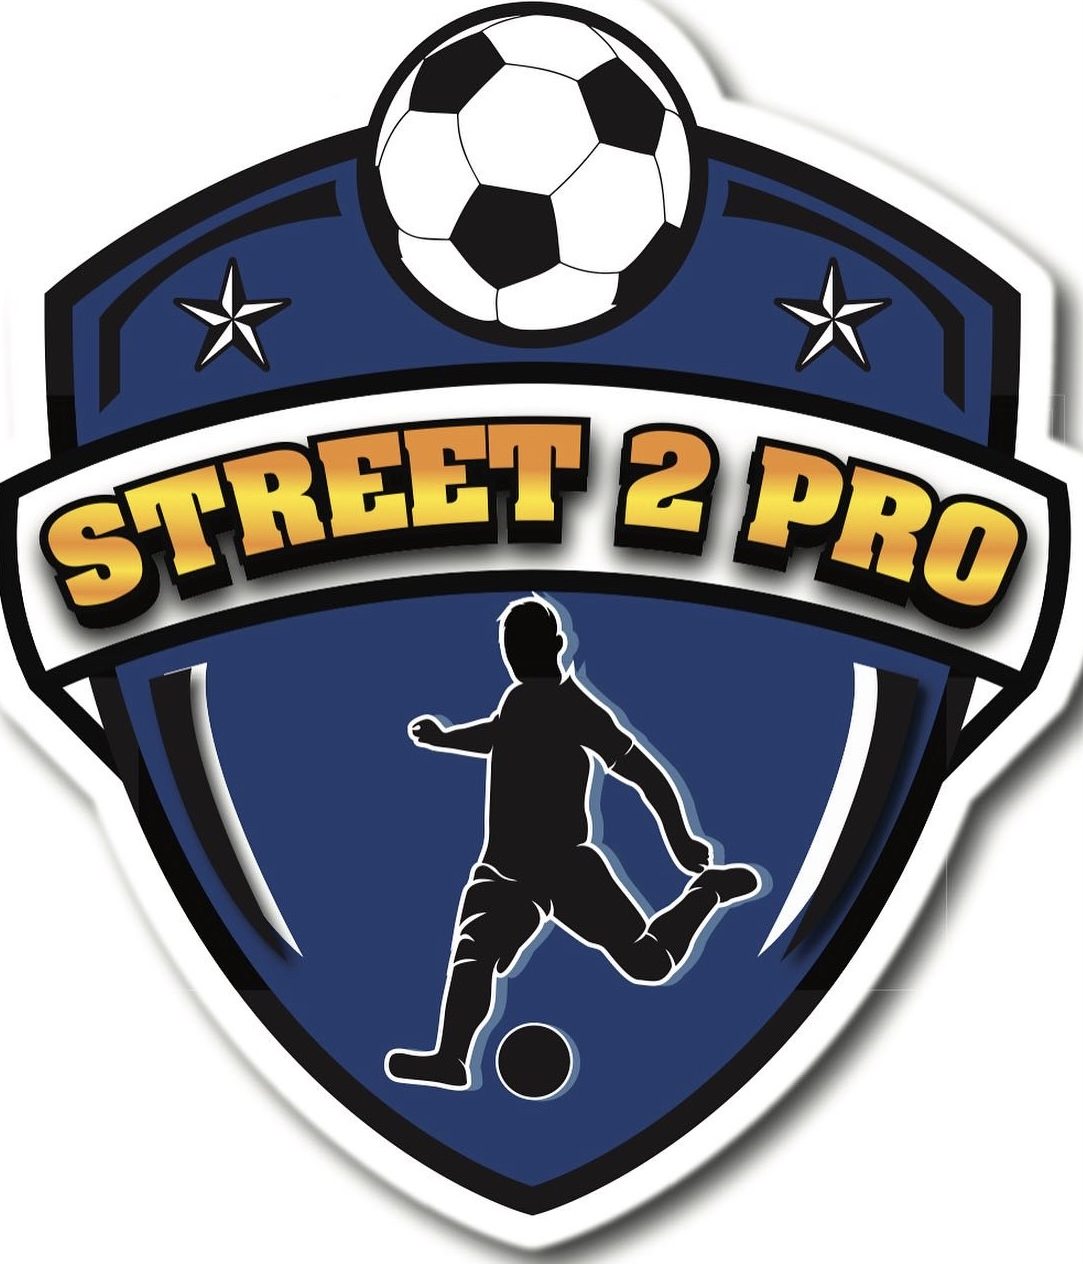 Welcome to Street 2 Pro